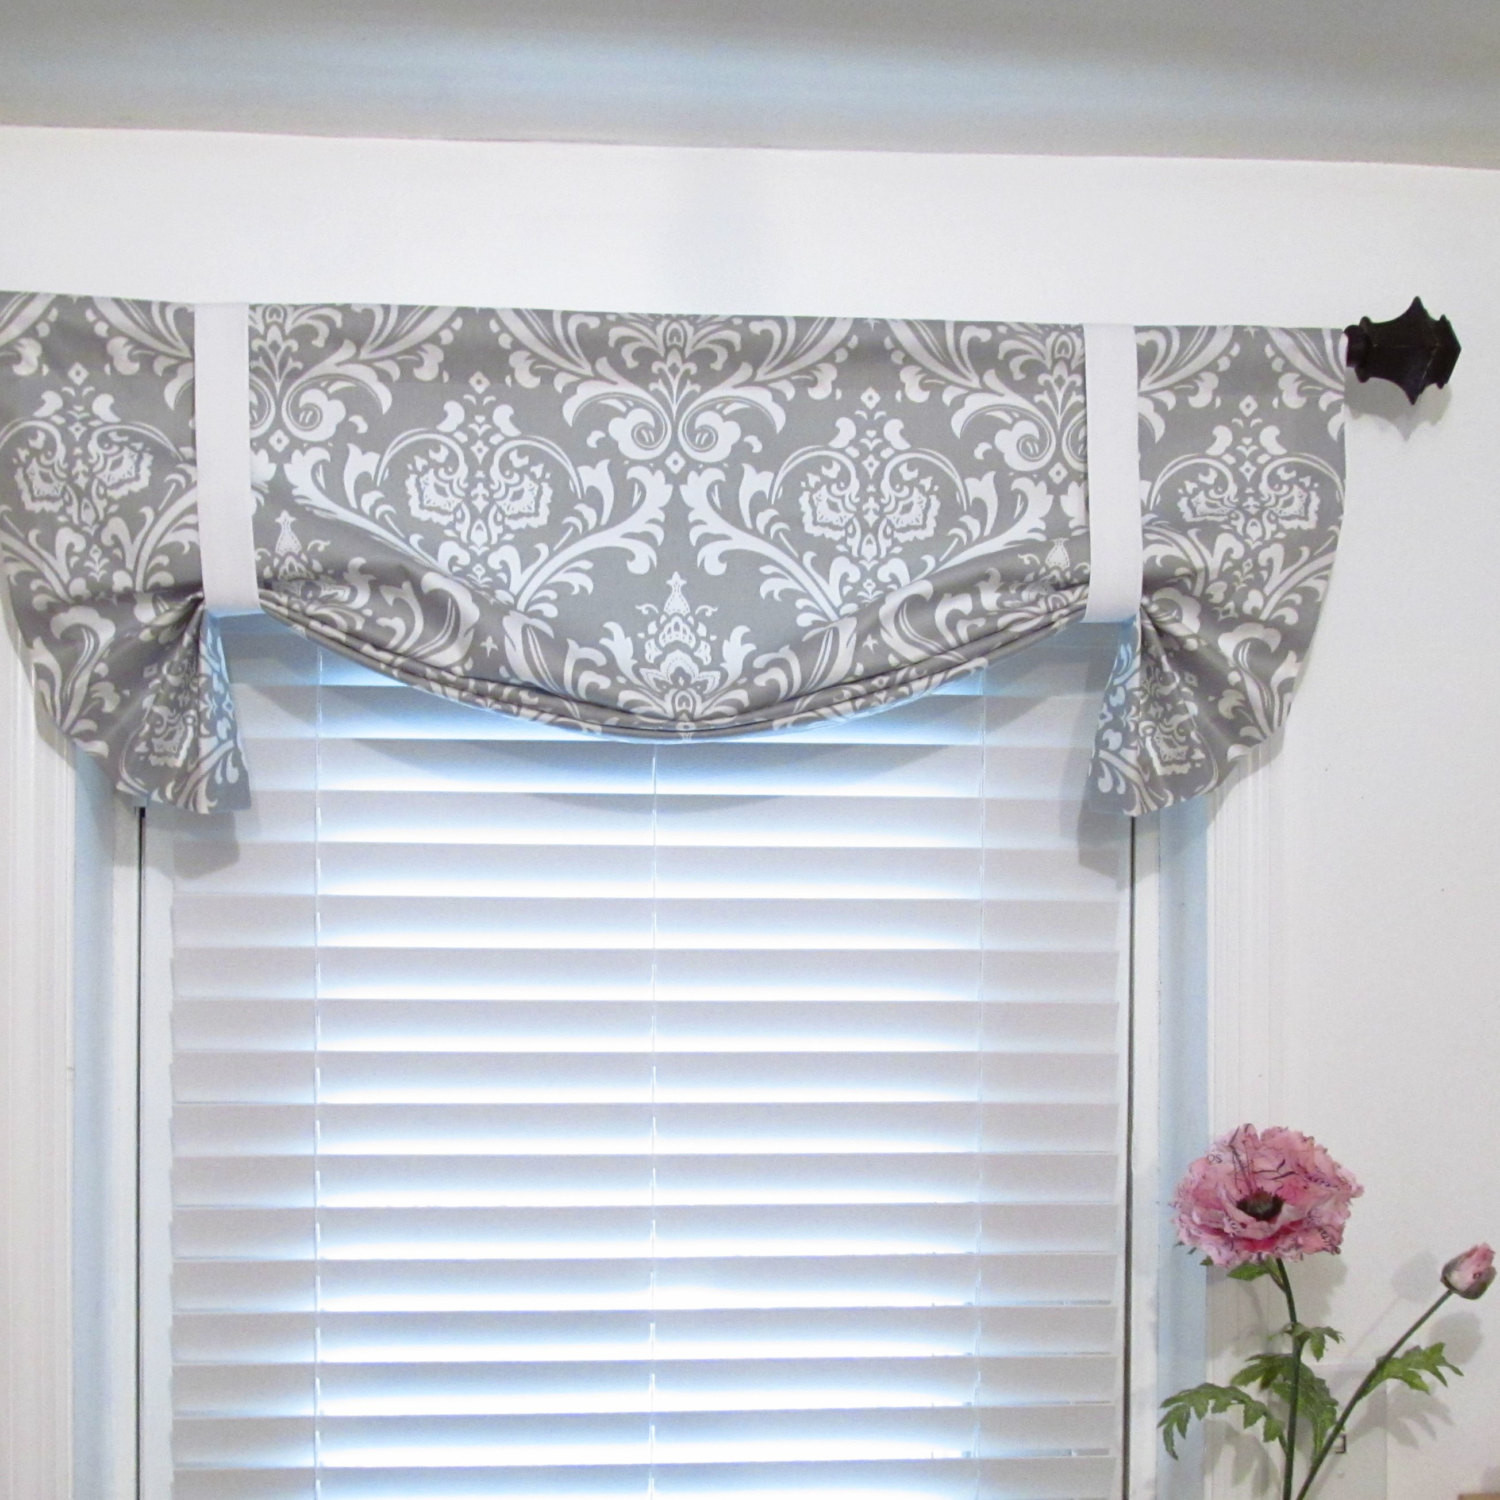 Tie Up Kitchen Curtains
 Tie Up Curtain Valance Gray White Damask by supplierofdreams